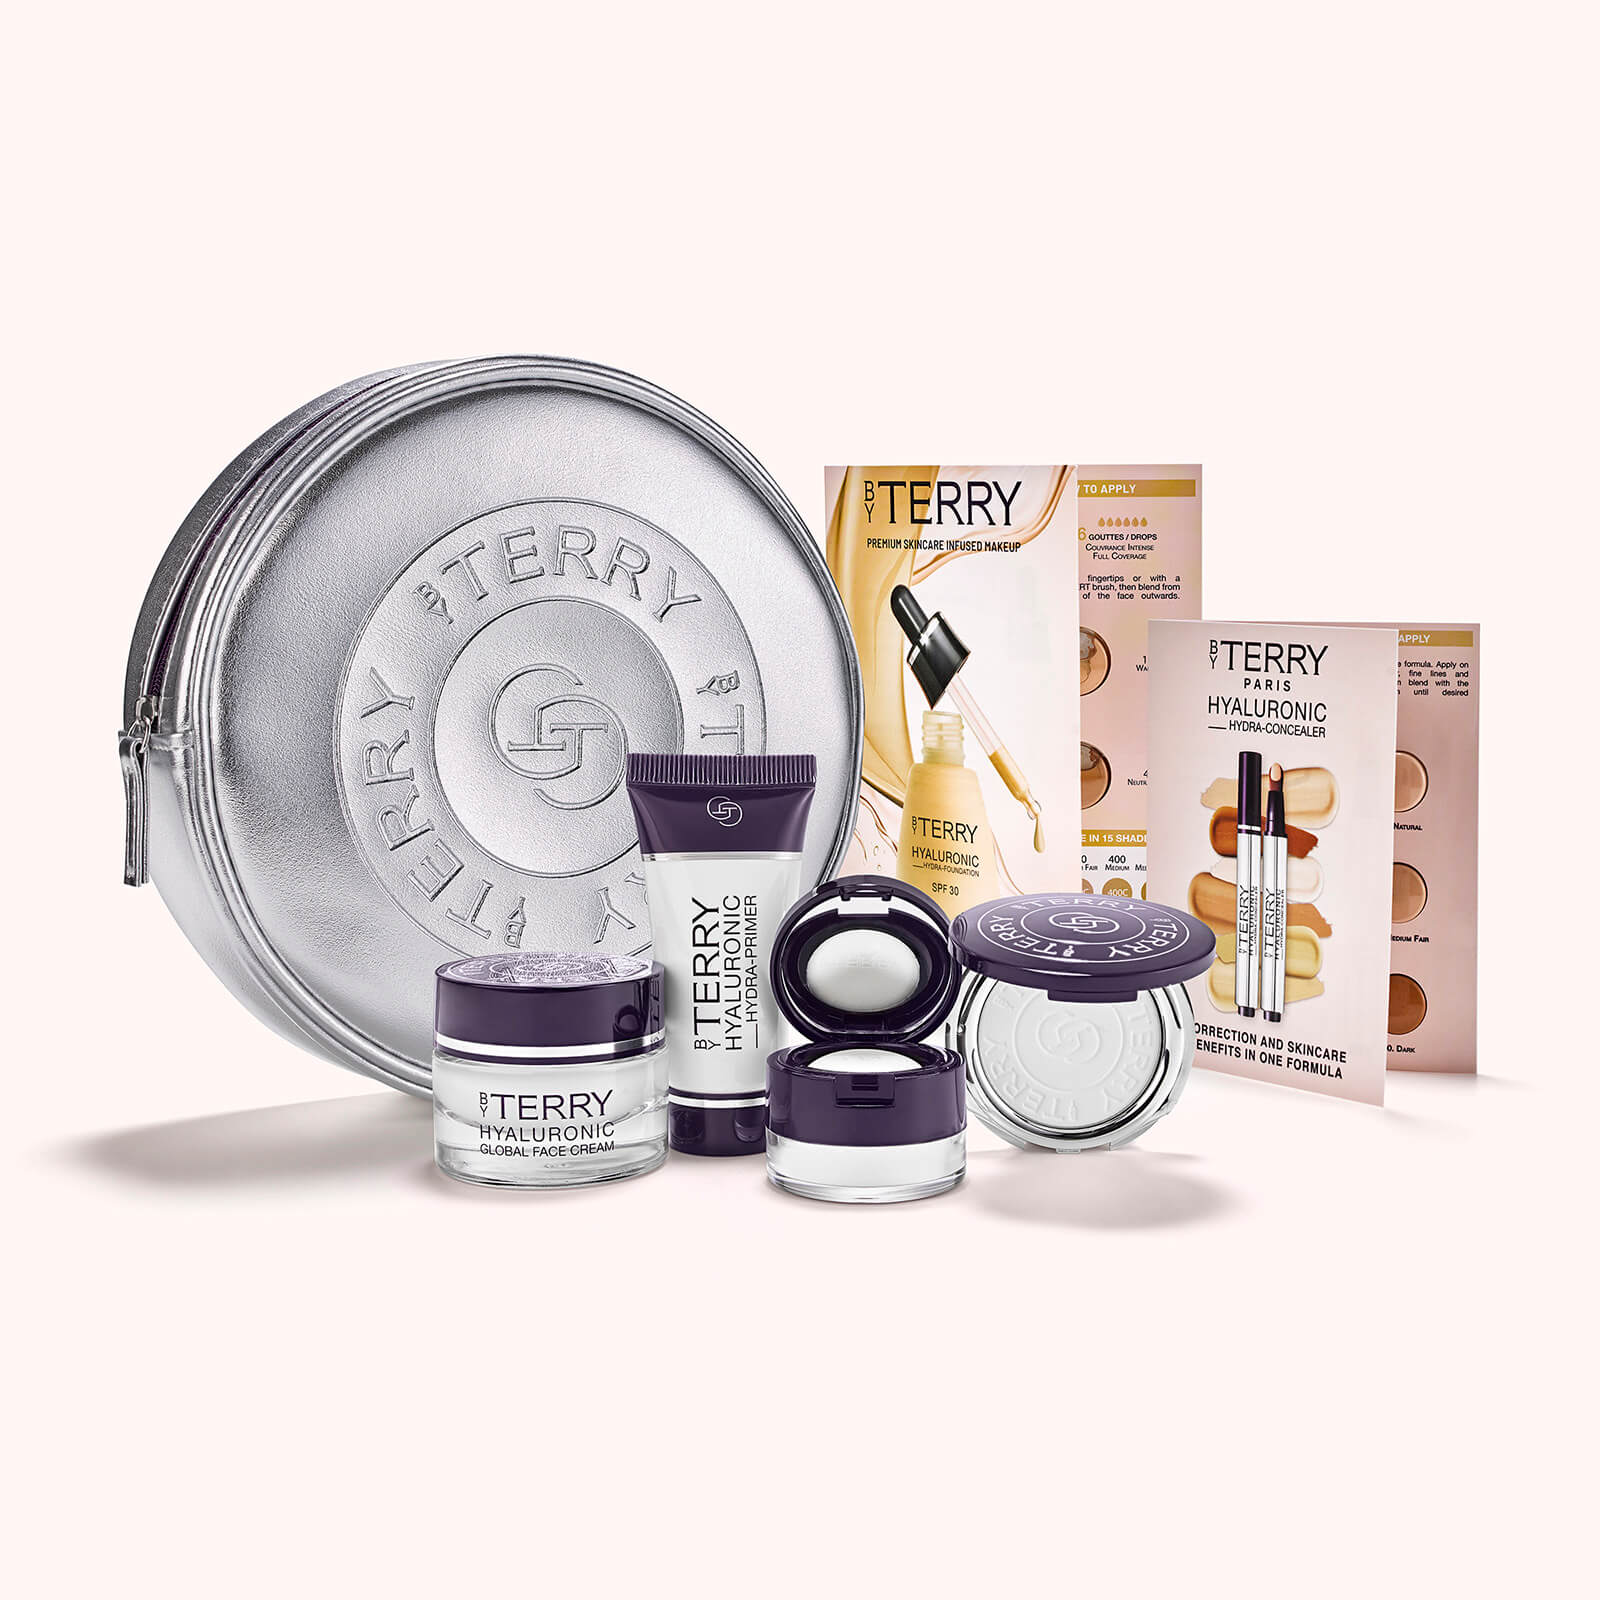 By Terry My Hyaluronic Routine Set (Worth £69.00)